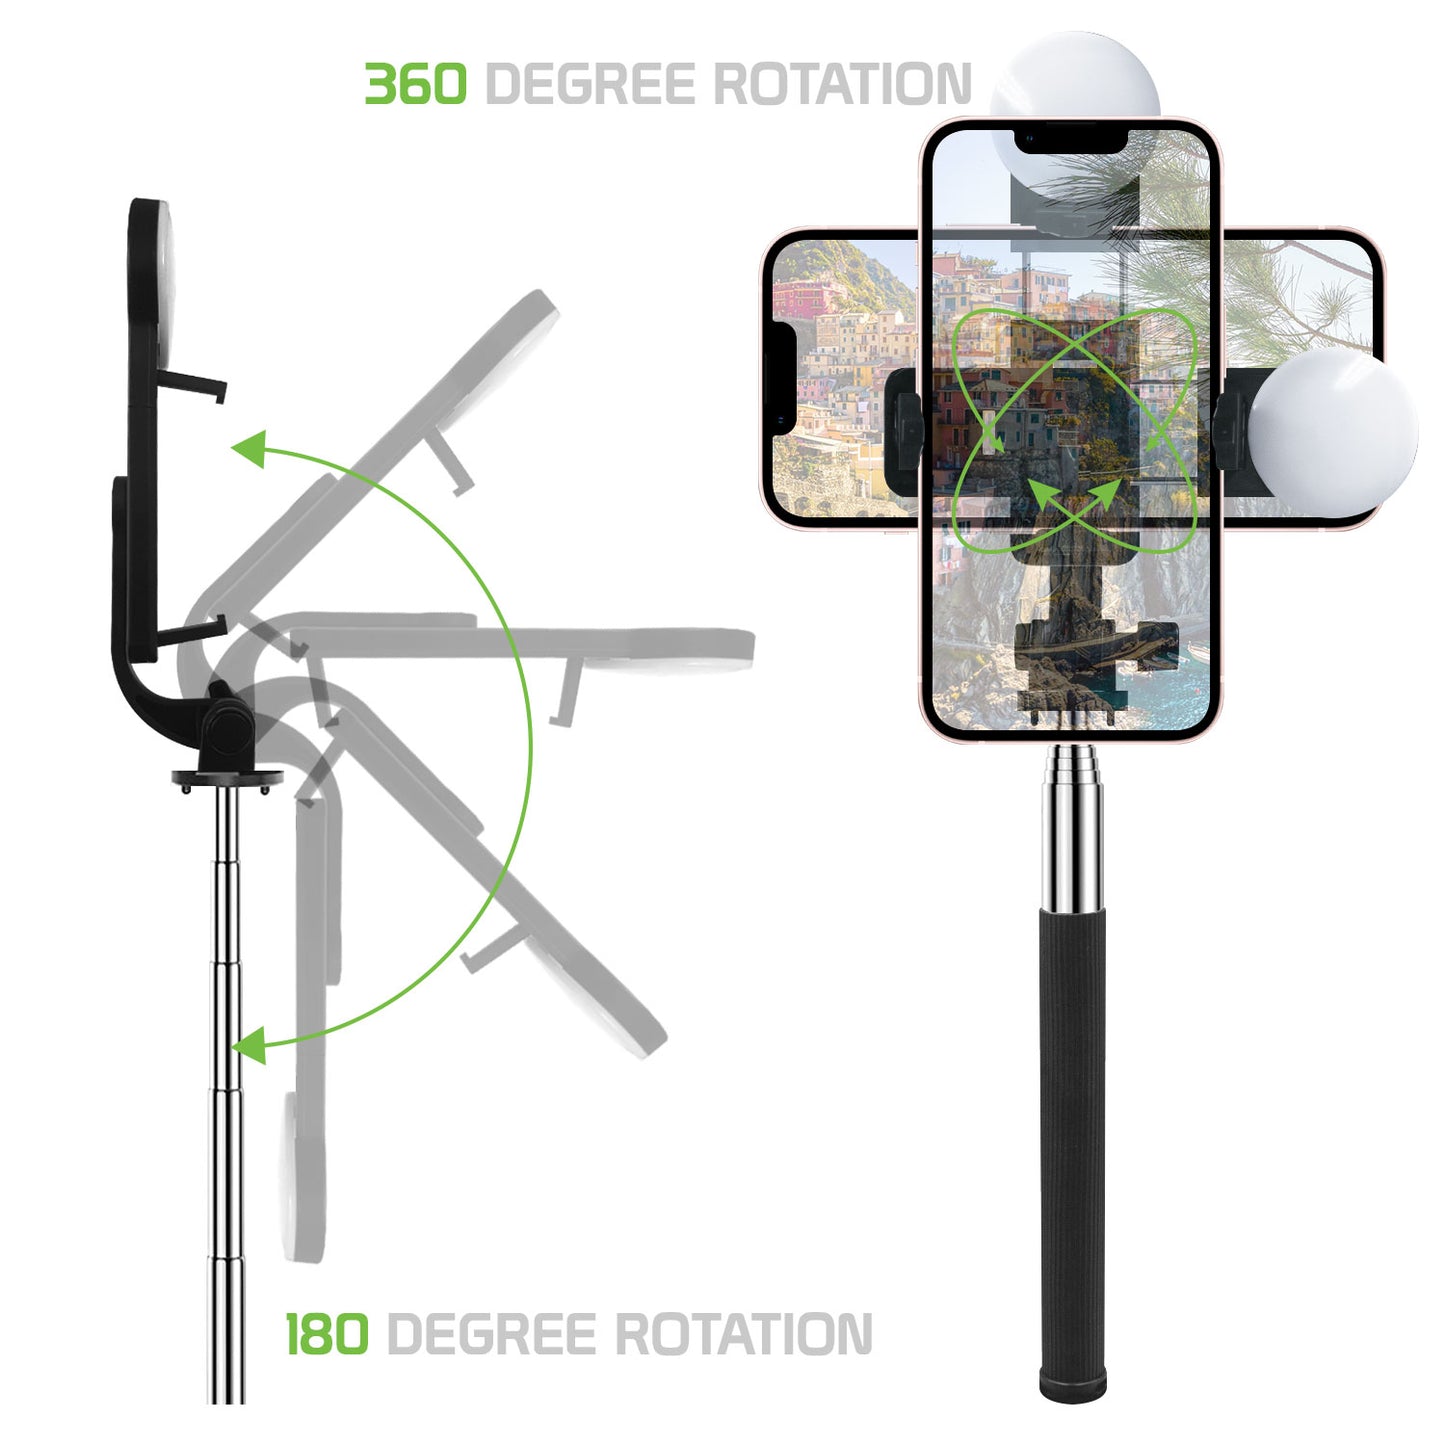 Selfie Stick with Attachable Tripod Base, 3 Adjustable Lighting Modes for Live Streams, Videos and Photos Compatible to iPhones and Androids